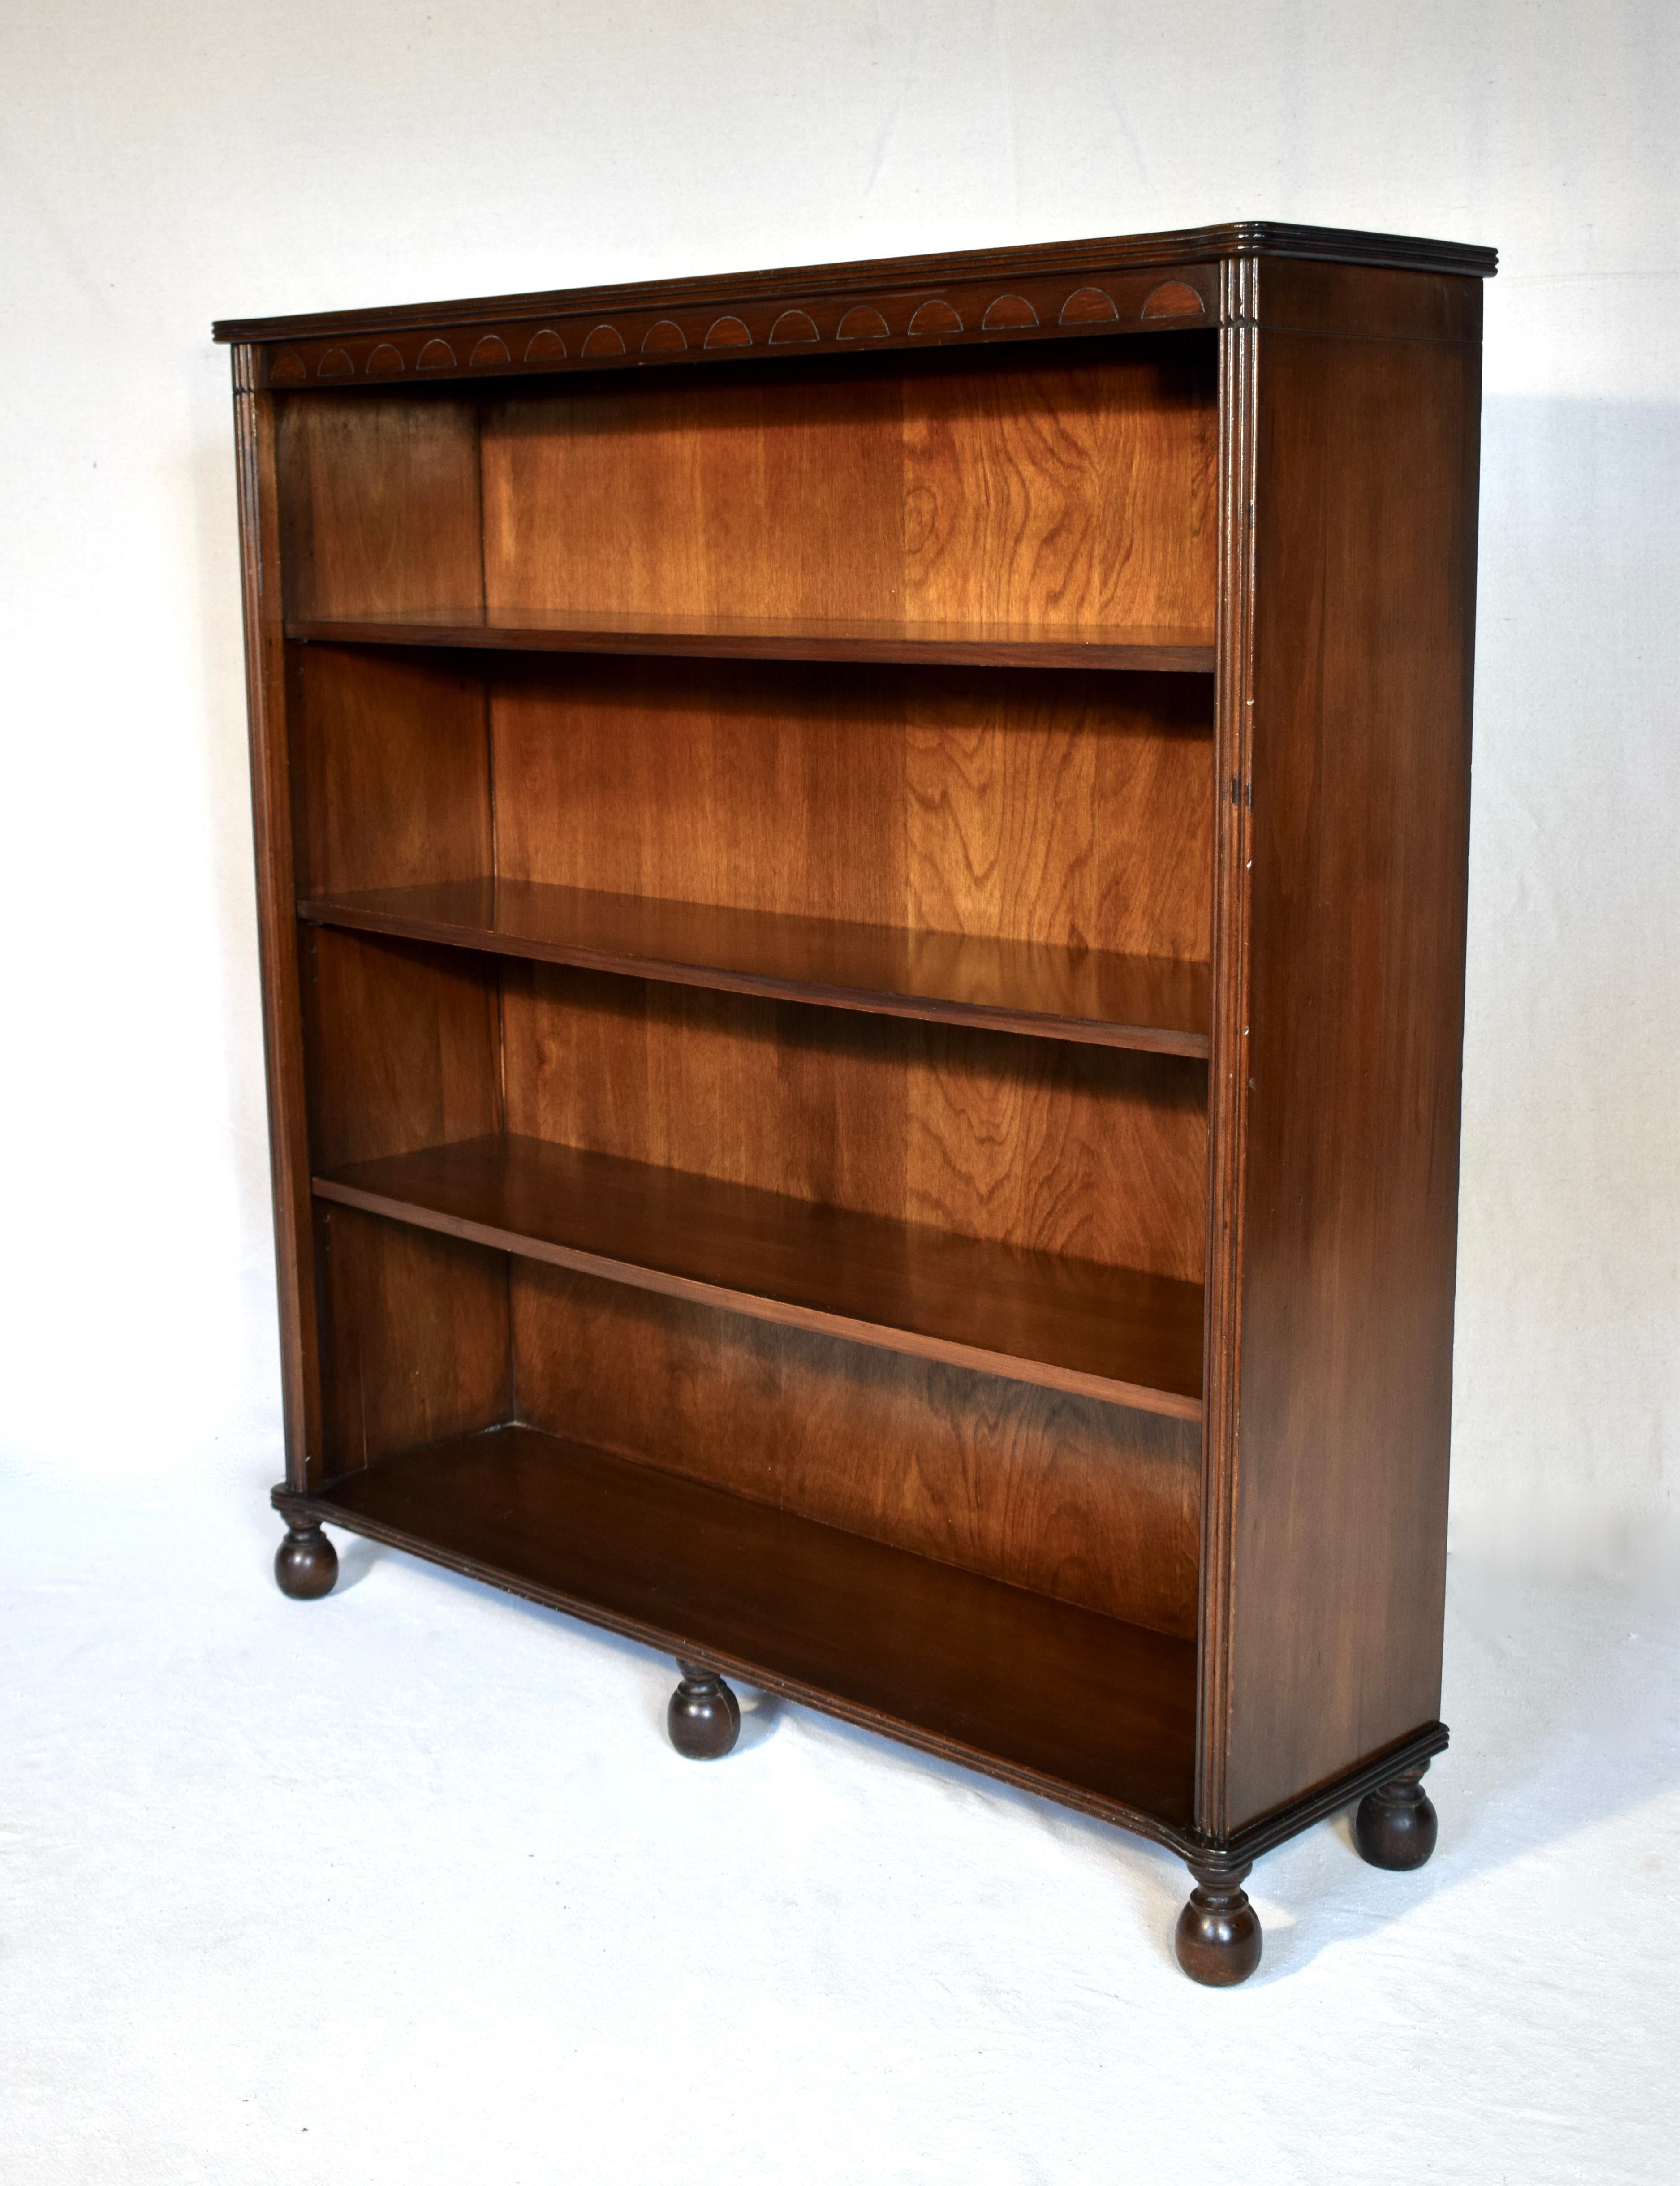 Generous size solid Mahogany open bookcase with three adjustable shelves & interesting cannonball feet. Marvelous transitional piece suitable for use in traditional or modern settings.